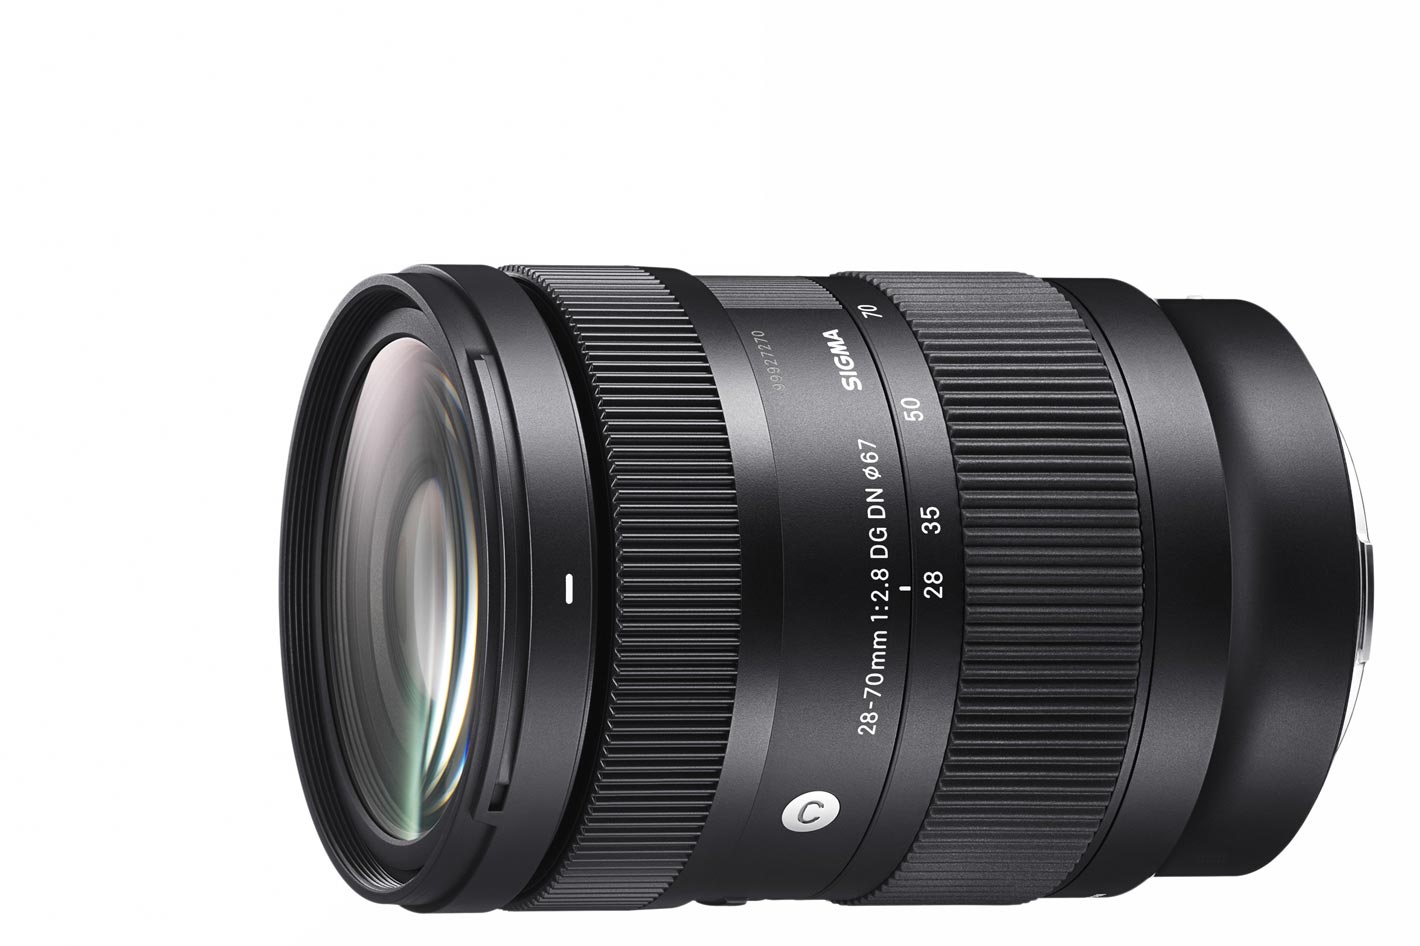 SIGMA 28-70mm F2.8 DG DN: redefining the standard zoom